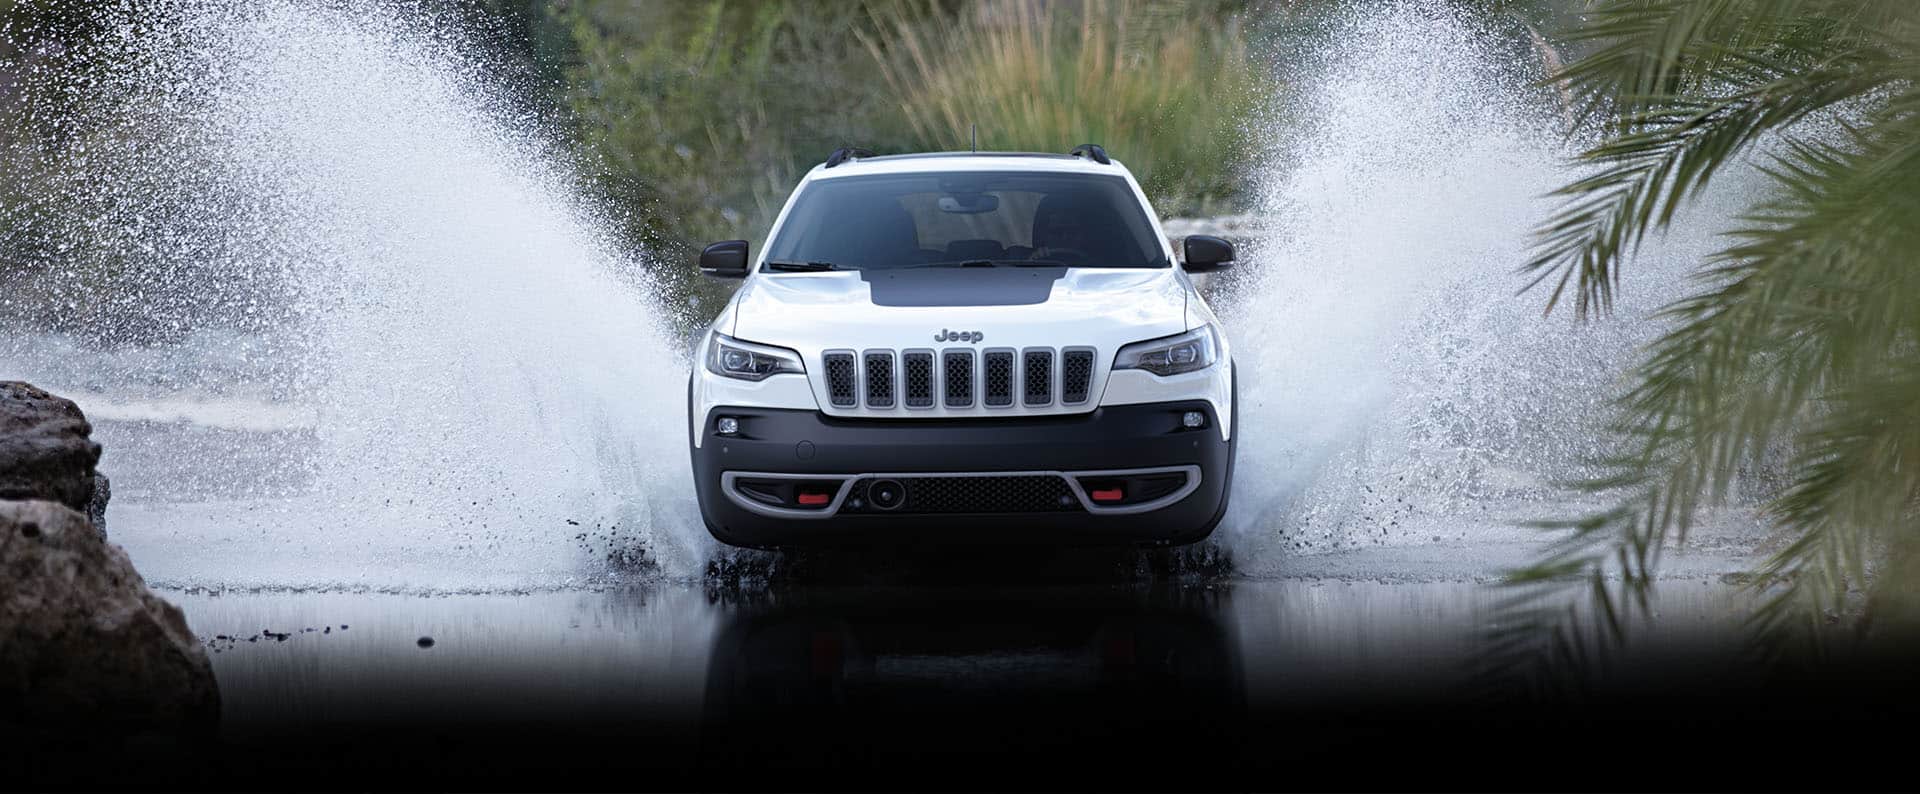 A head-on view of the 2022 Jeep Cherokee Trailhawk being driven through a stream with sprays of water on both sides.